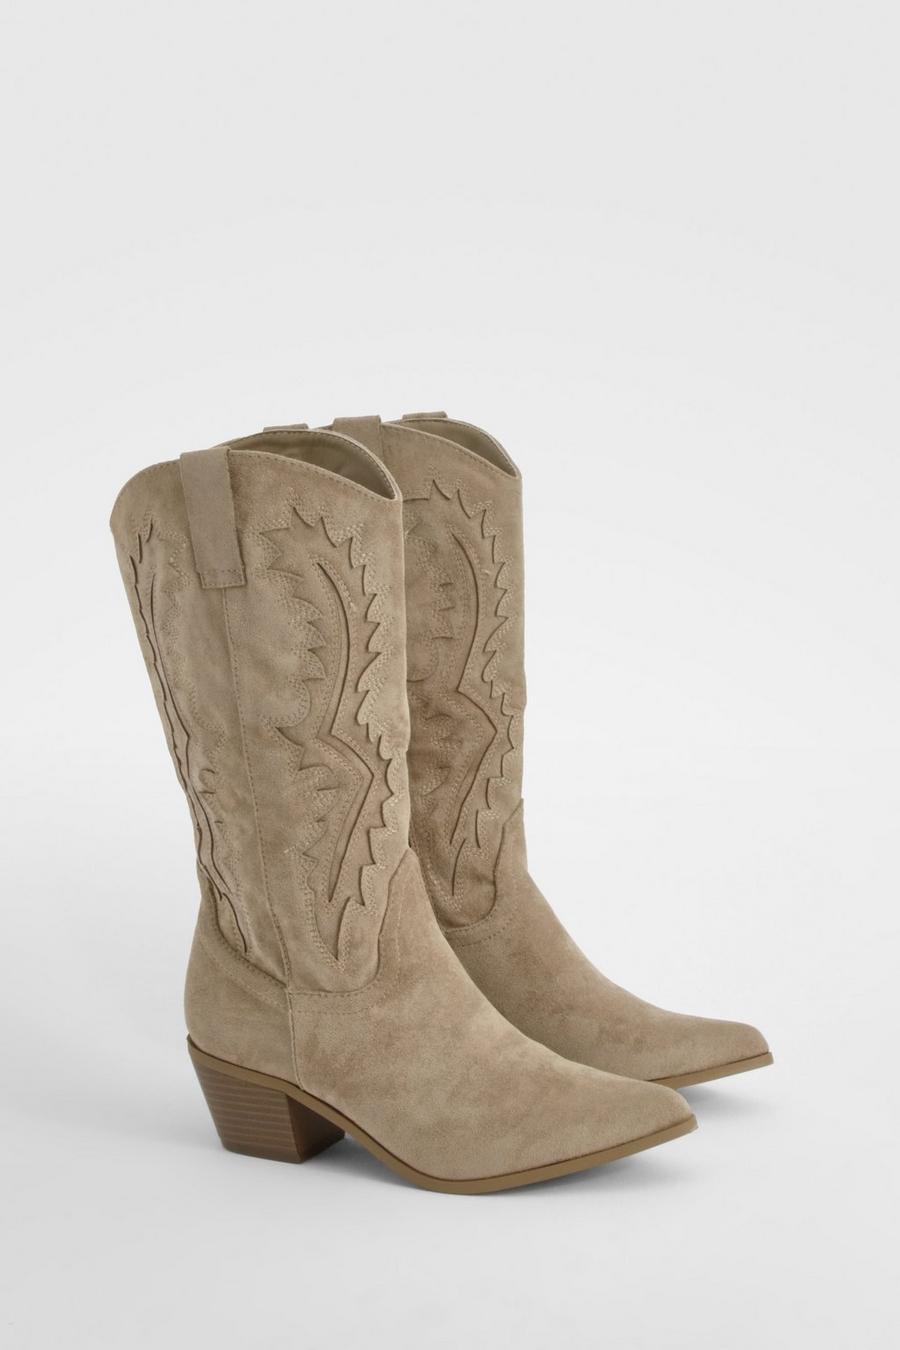 Taupe Embroidered Western Cowboy Boots        